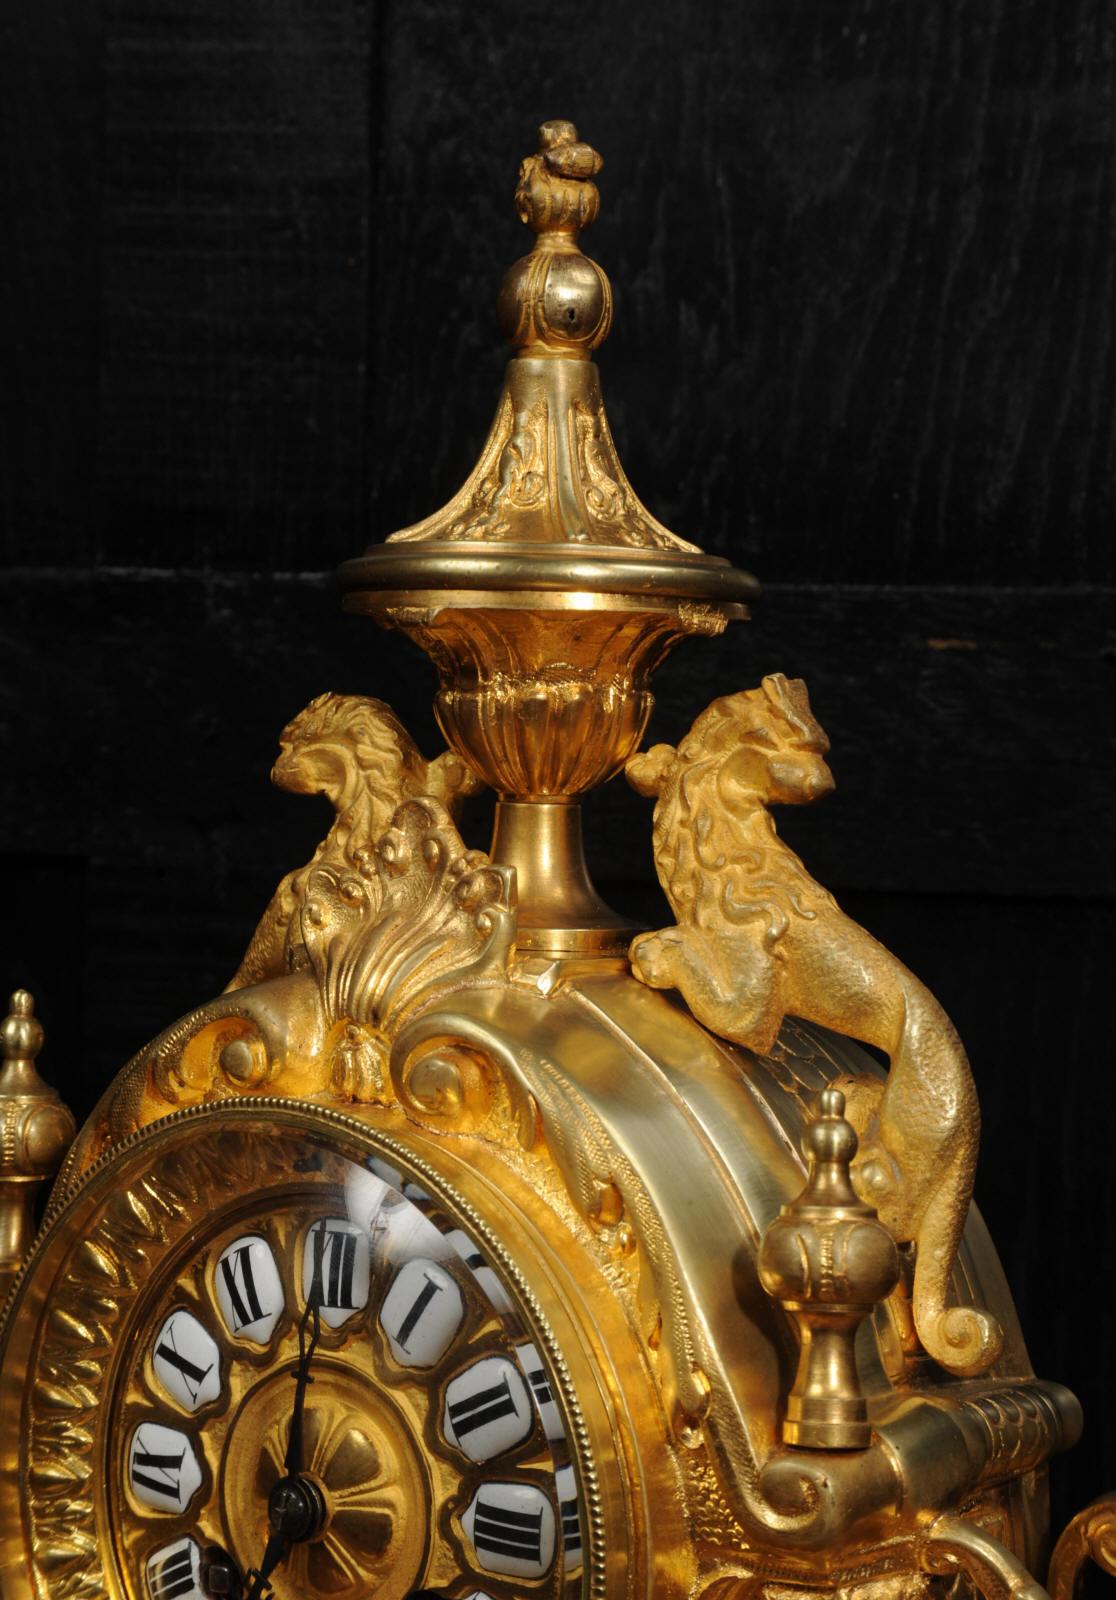 Antique French Ormolu Clock - Lions Rampant - overhauled and tested For Sale 9